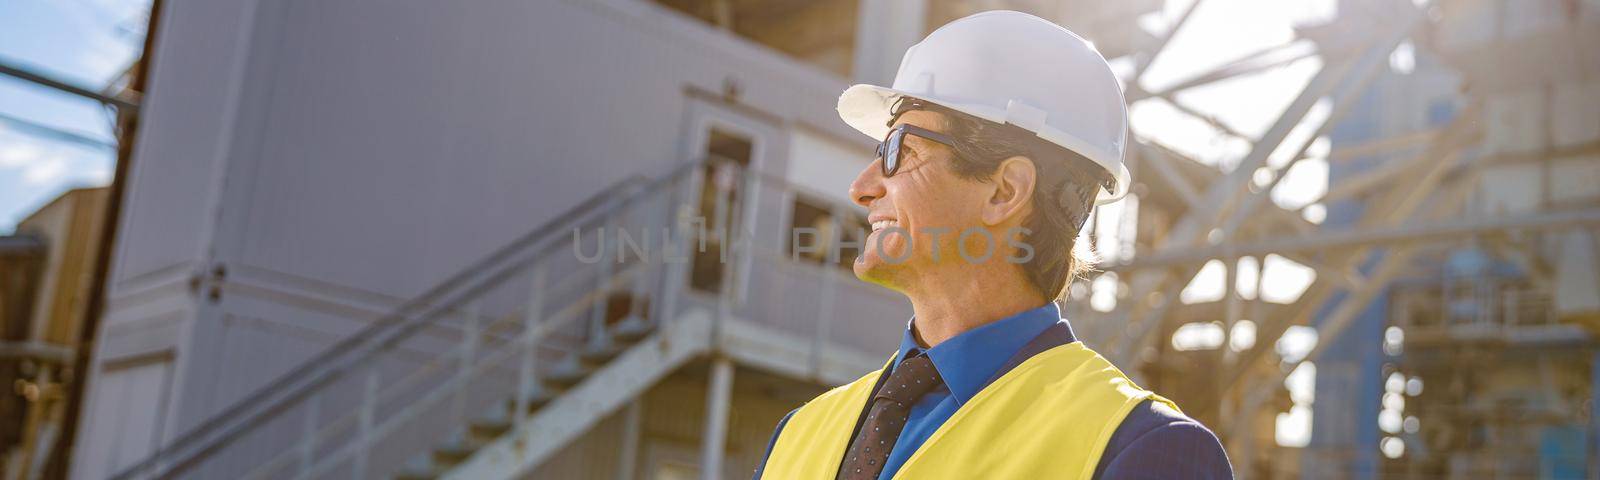 Joyful matured man holding folder with documents and smiling while standing on territory of production plant